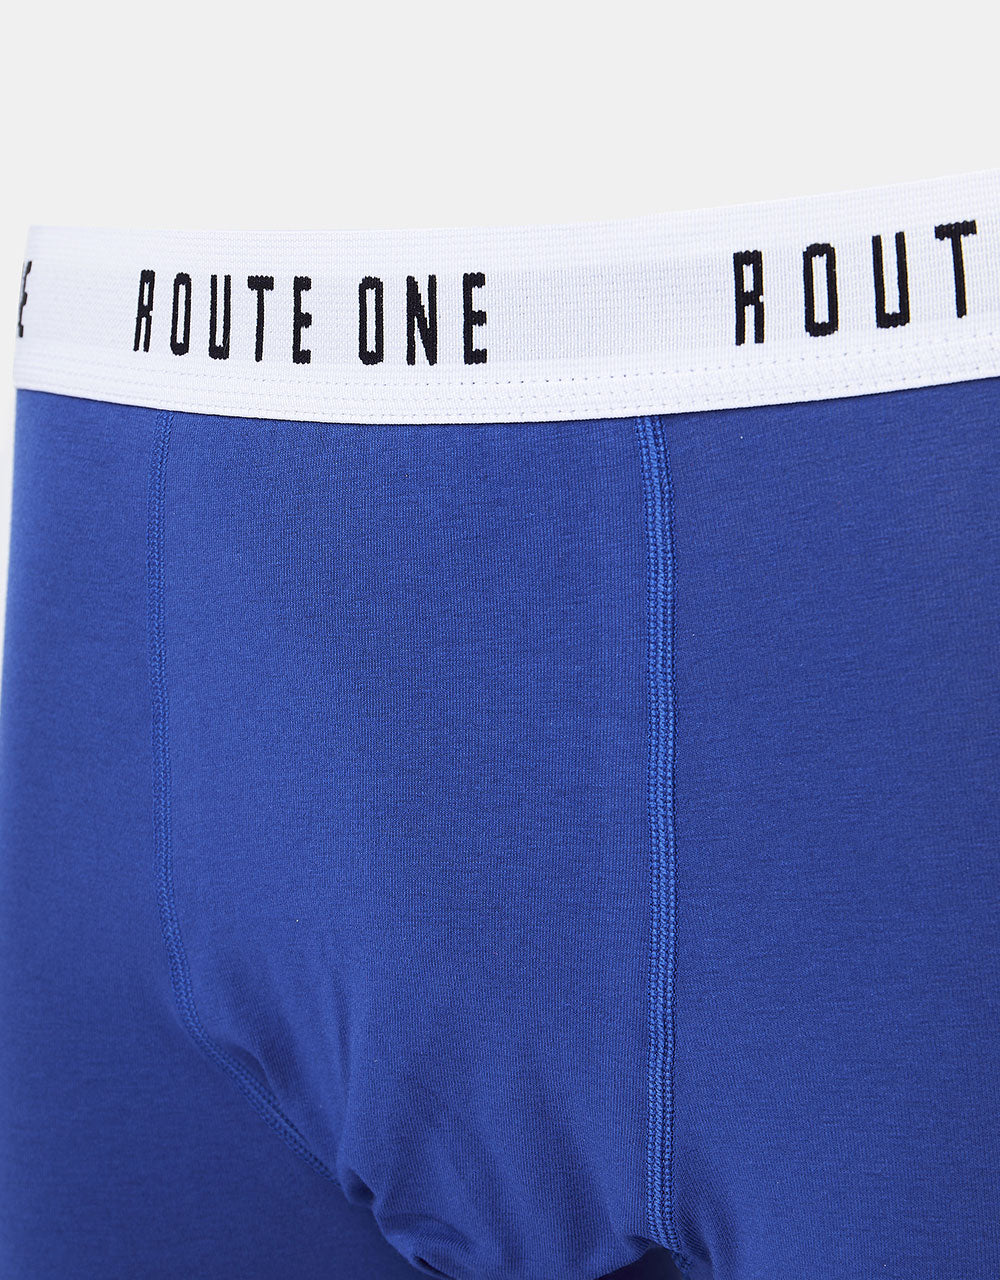 Route One Classic Boxer Shorts 2 Pack - Duck Egg/Stone Blue